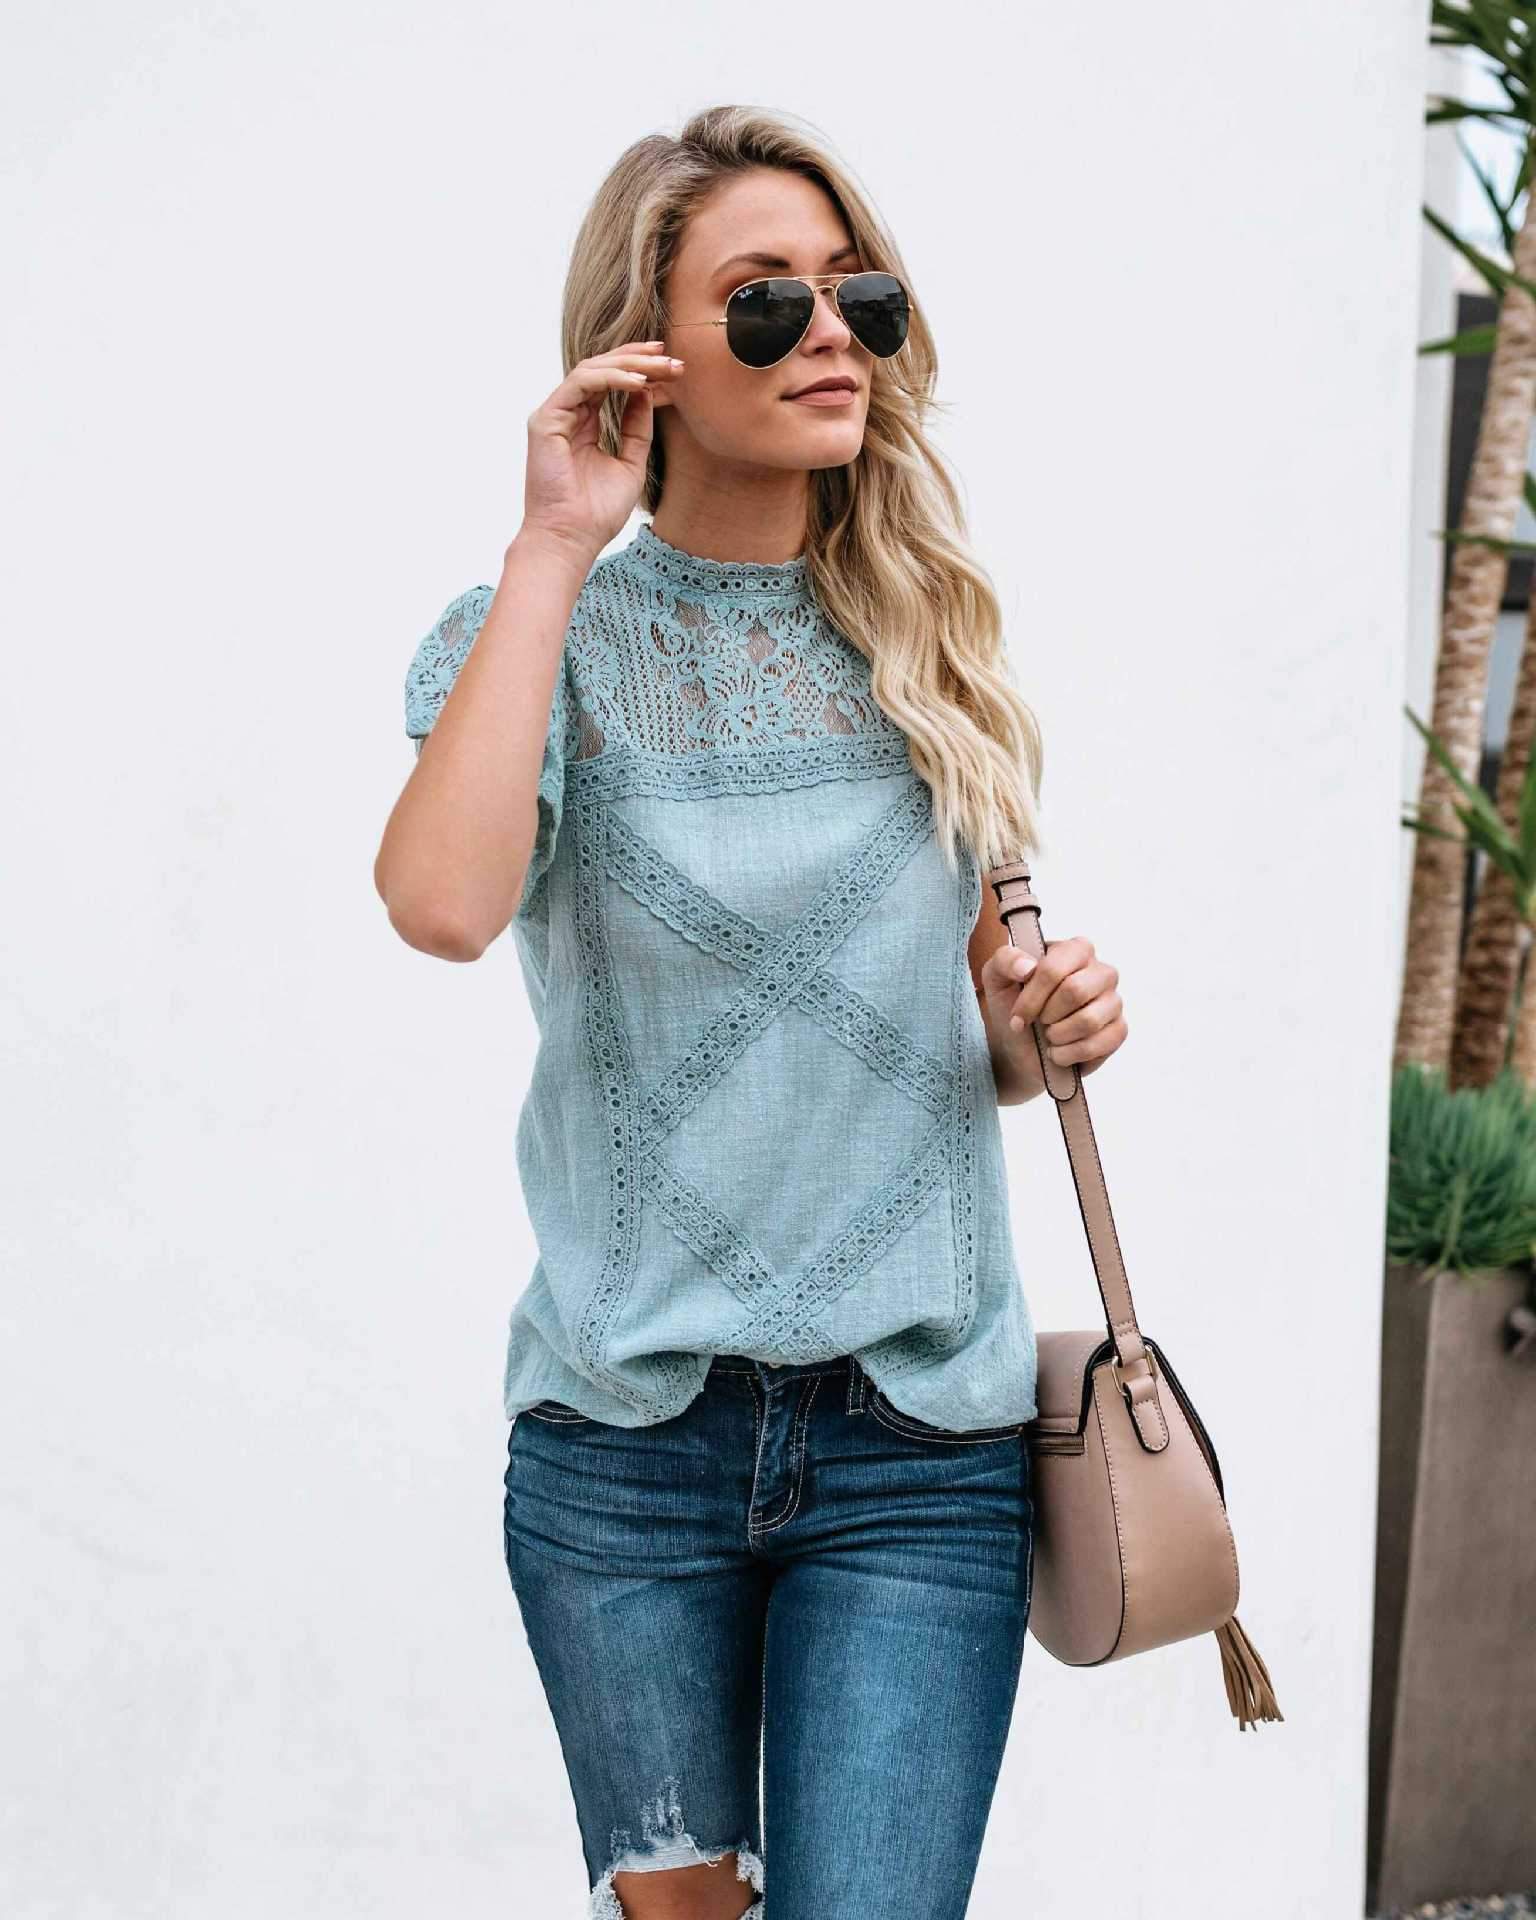 Cute Boho Chic Short Sleeve Lace Shoulder Blouse Shirts on sale - SOUISEE